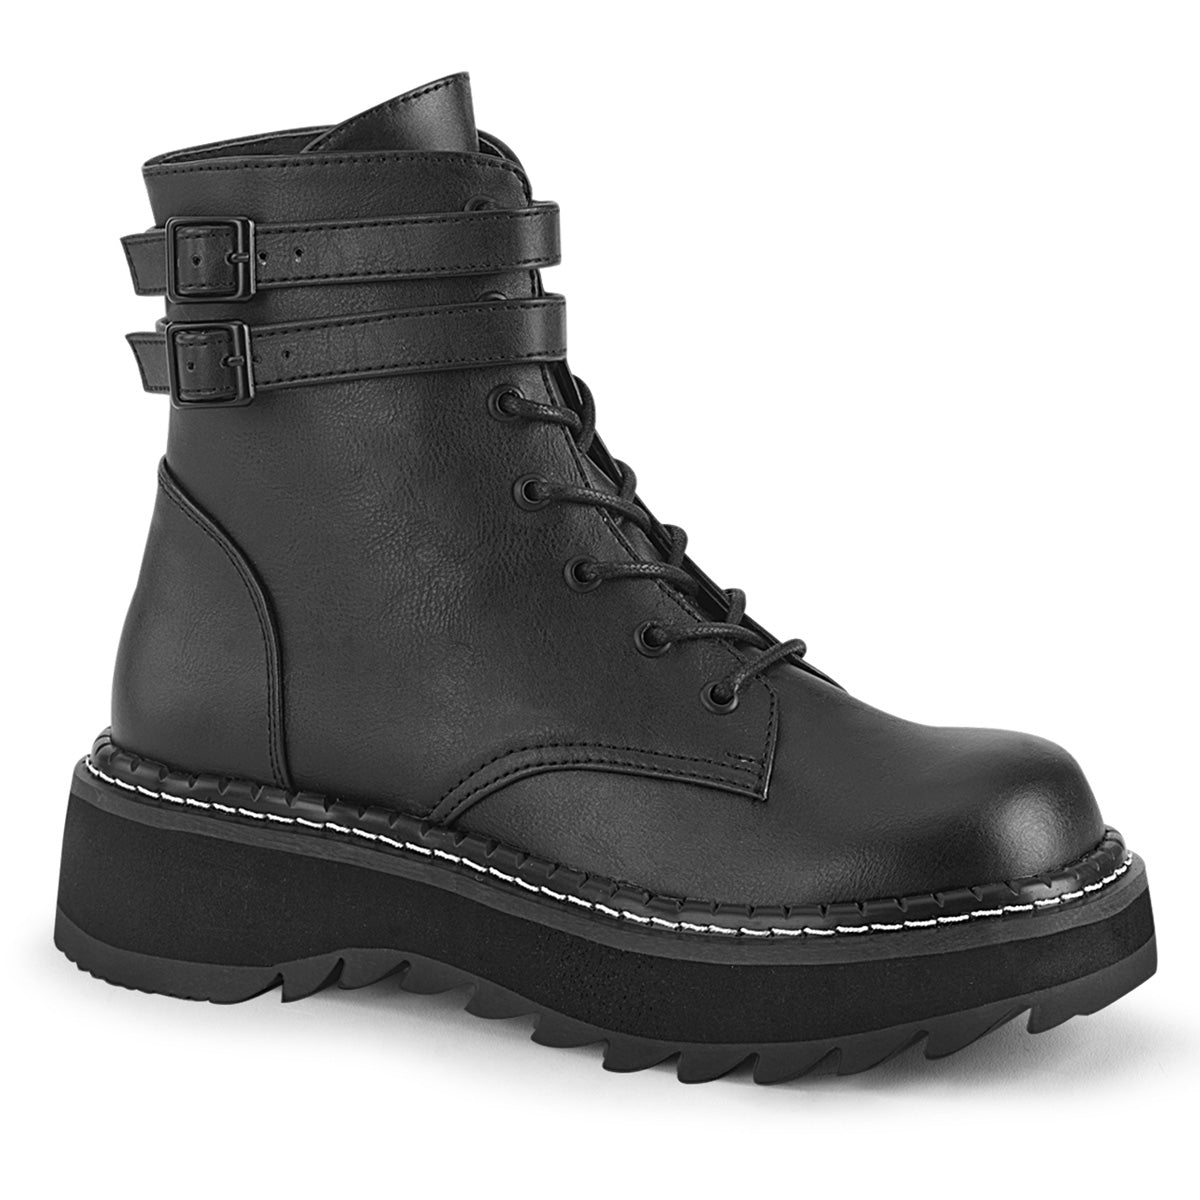 Clearance DemoniaCult Lilith 152 Black Matt Size 5UK/8USA - From Clearance Sold By Alternative Footwear